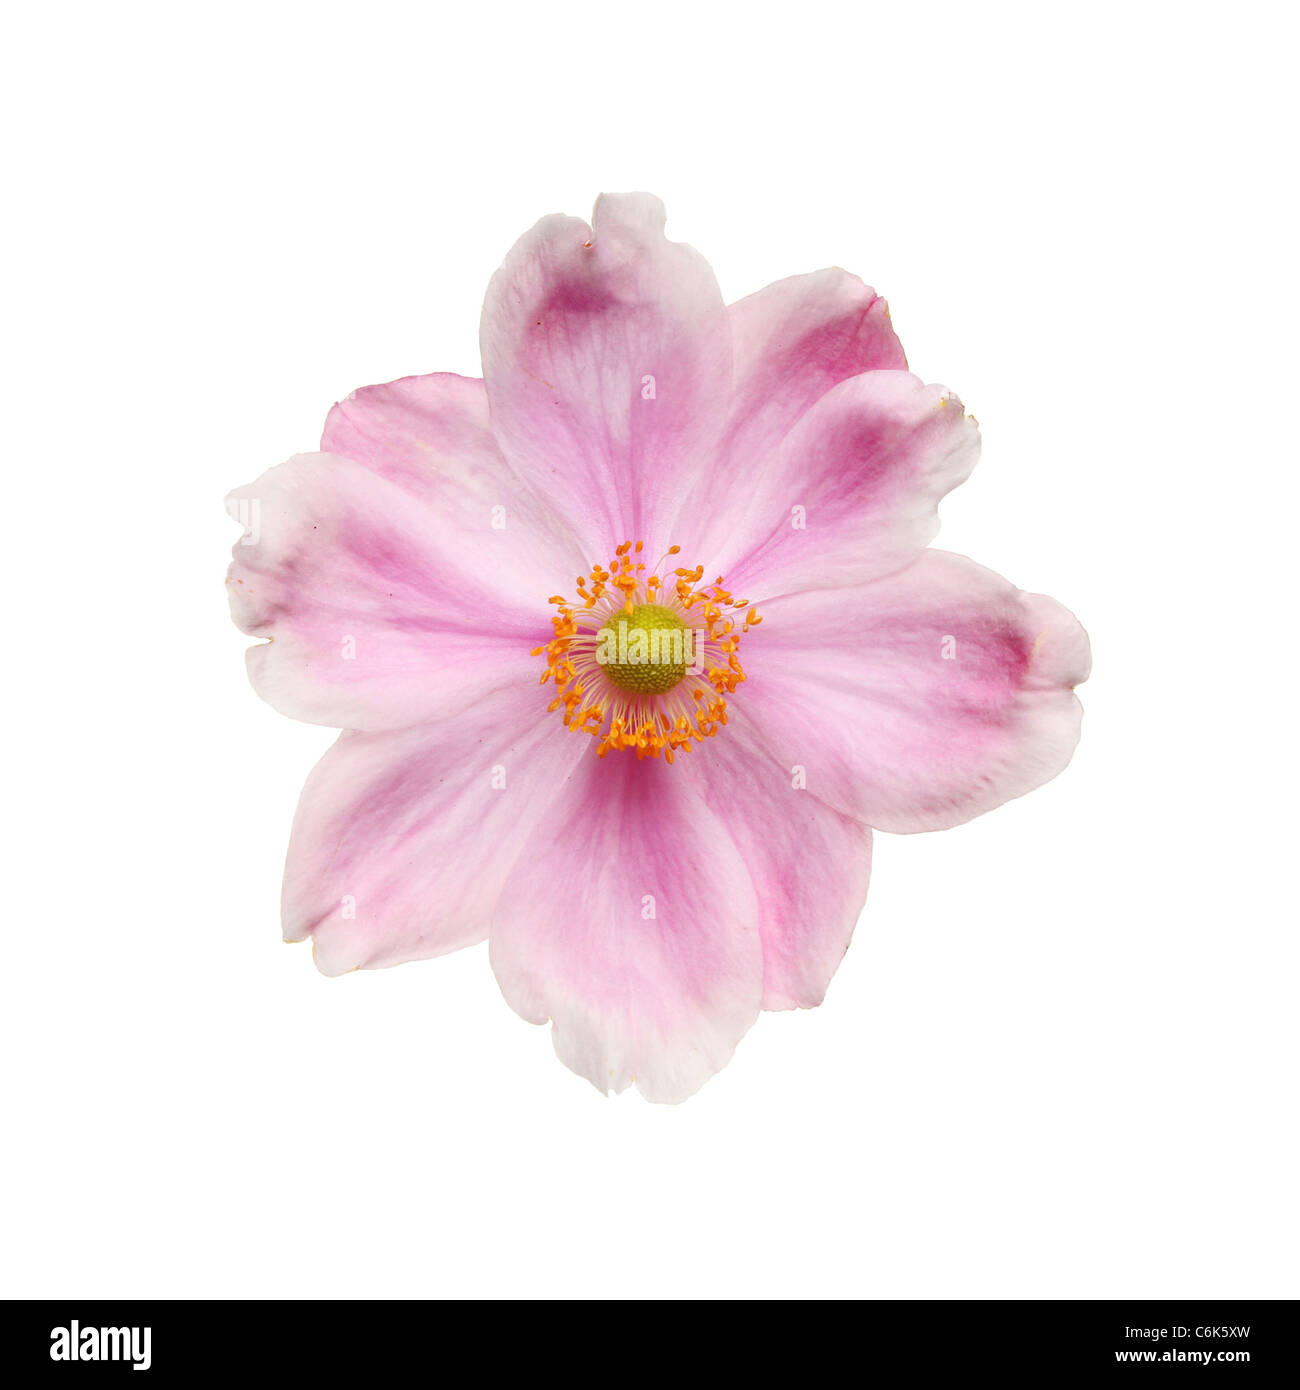 Anémone japonaise flower isolated on white Banque D'Images